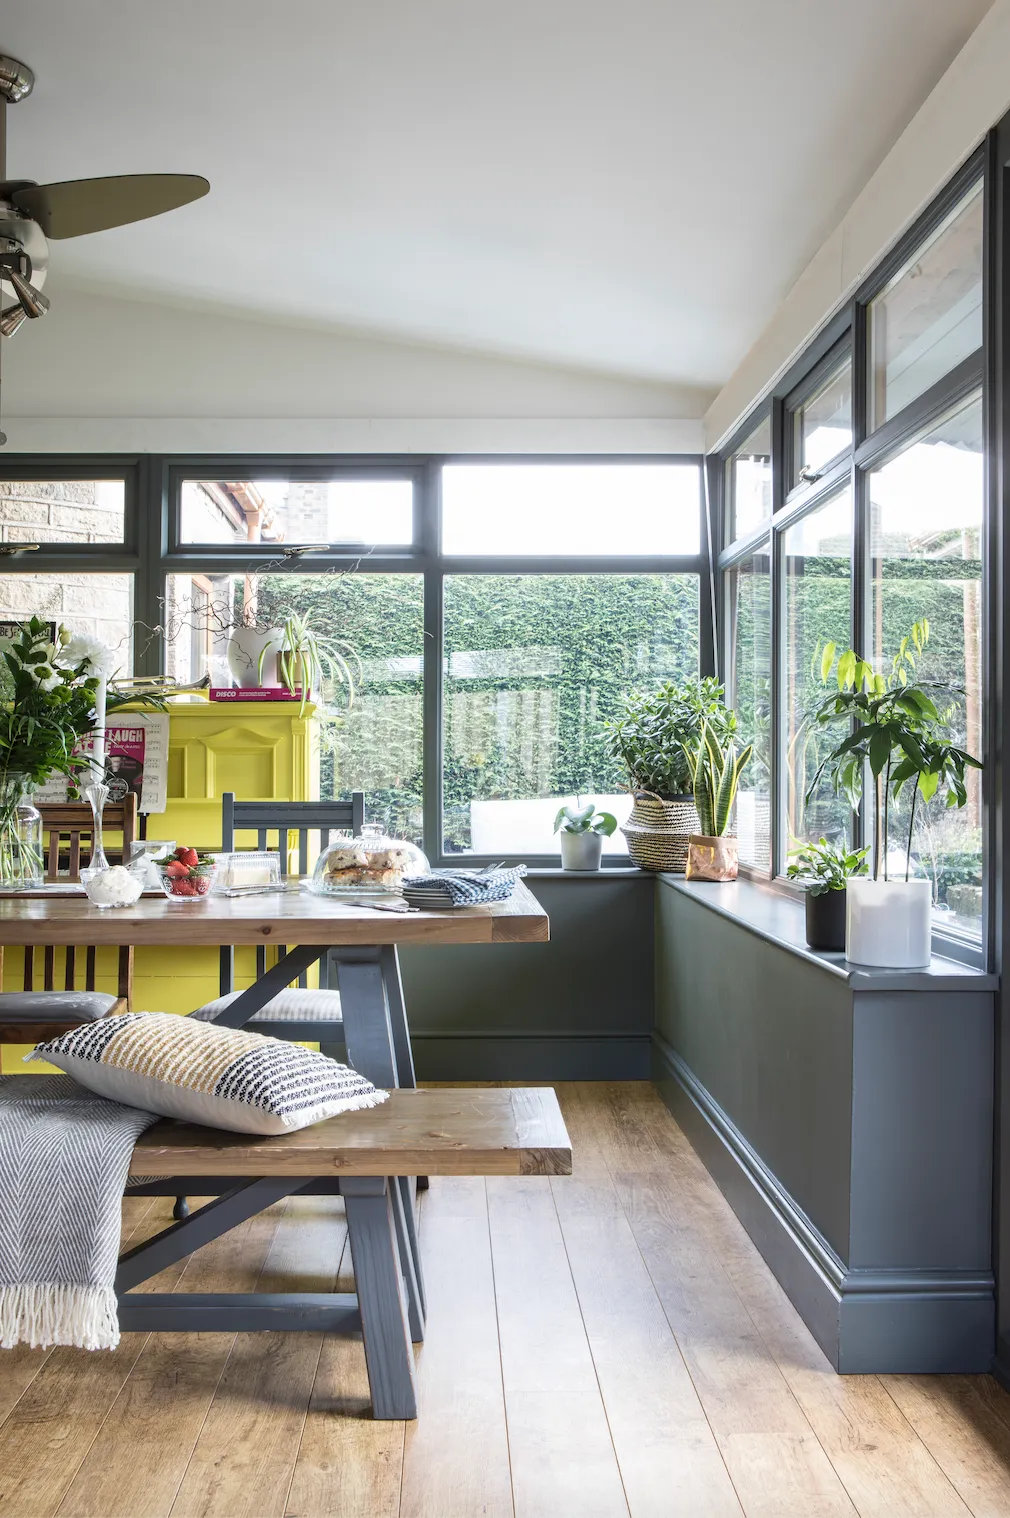 Garden room makeover: 'My colourful garden room cost next to nothing'